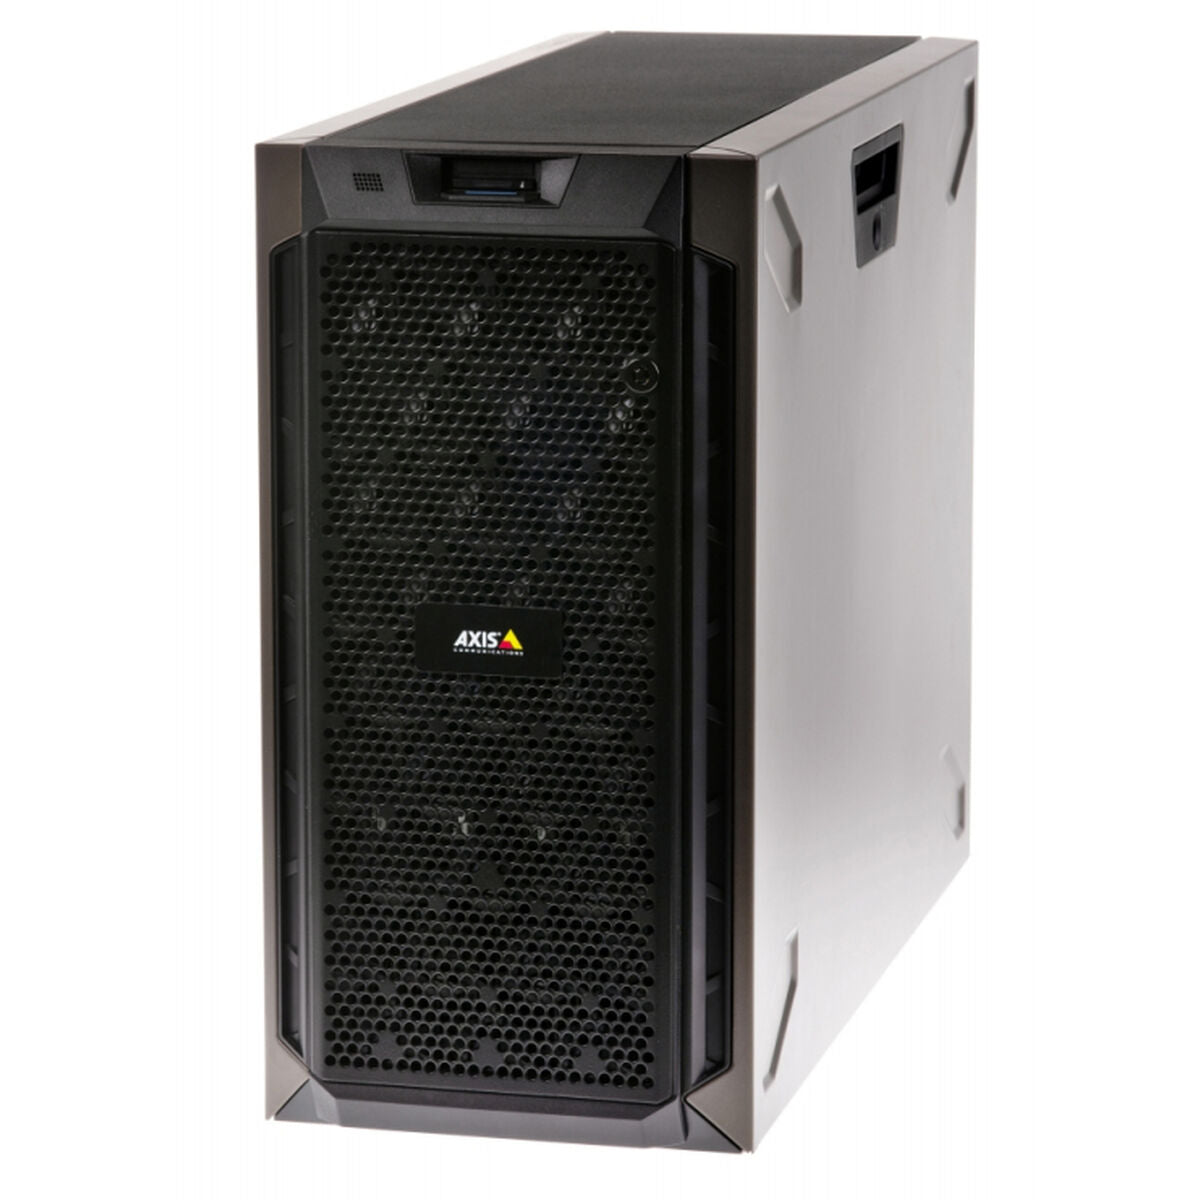 Server Axis AXIS S1132 32 TB, Axis, Computing, server-axis-axis-s1132-32-tb, :32 TB, Brand_Axis, category-reference-2609, category-reference-2791, category-reference-2799, category-reference-t-19685, computers / components, Condition_NEW, office, Price_+ 1000, Teleworking, RiotNook